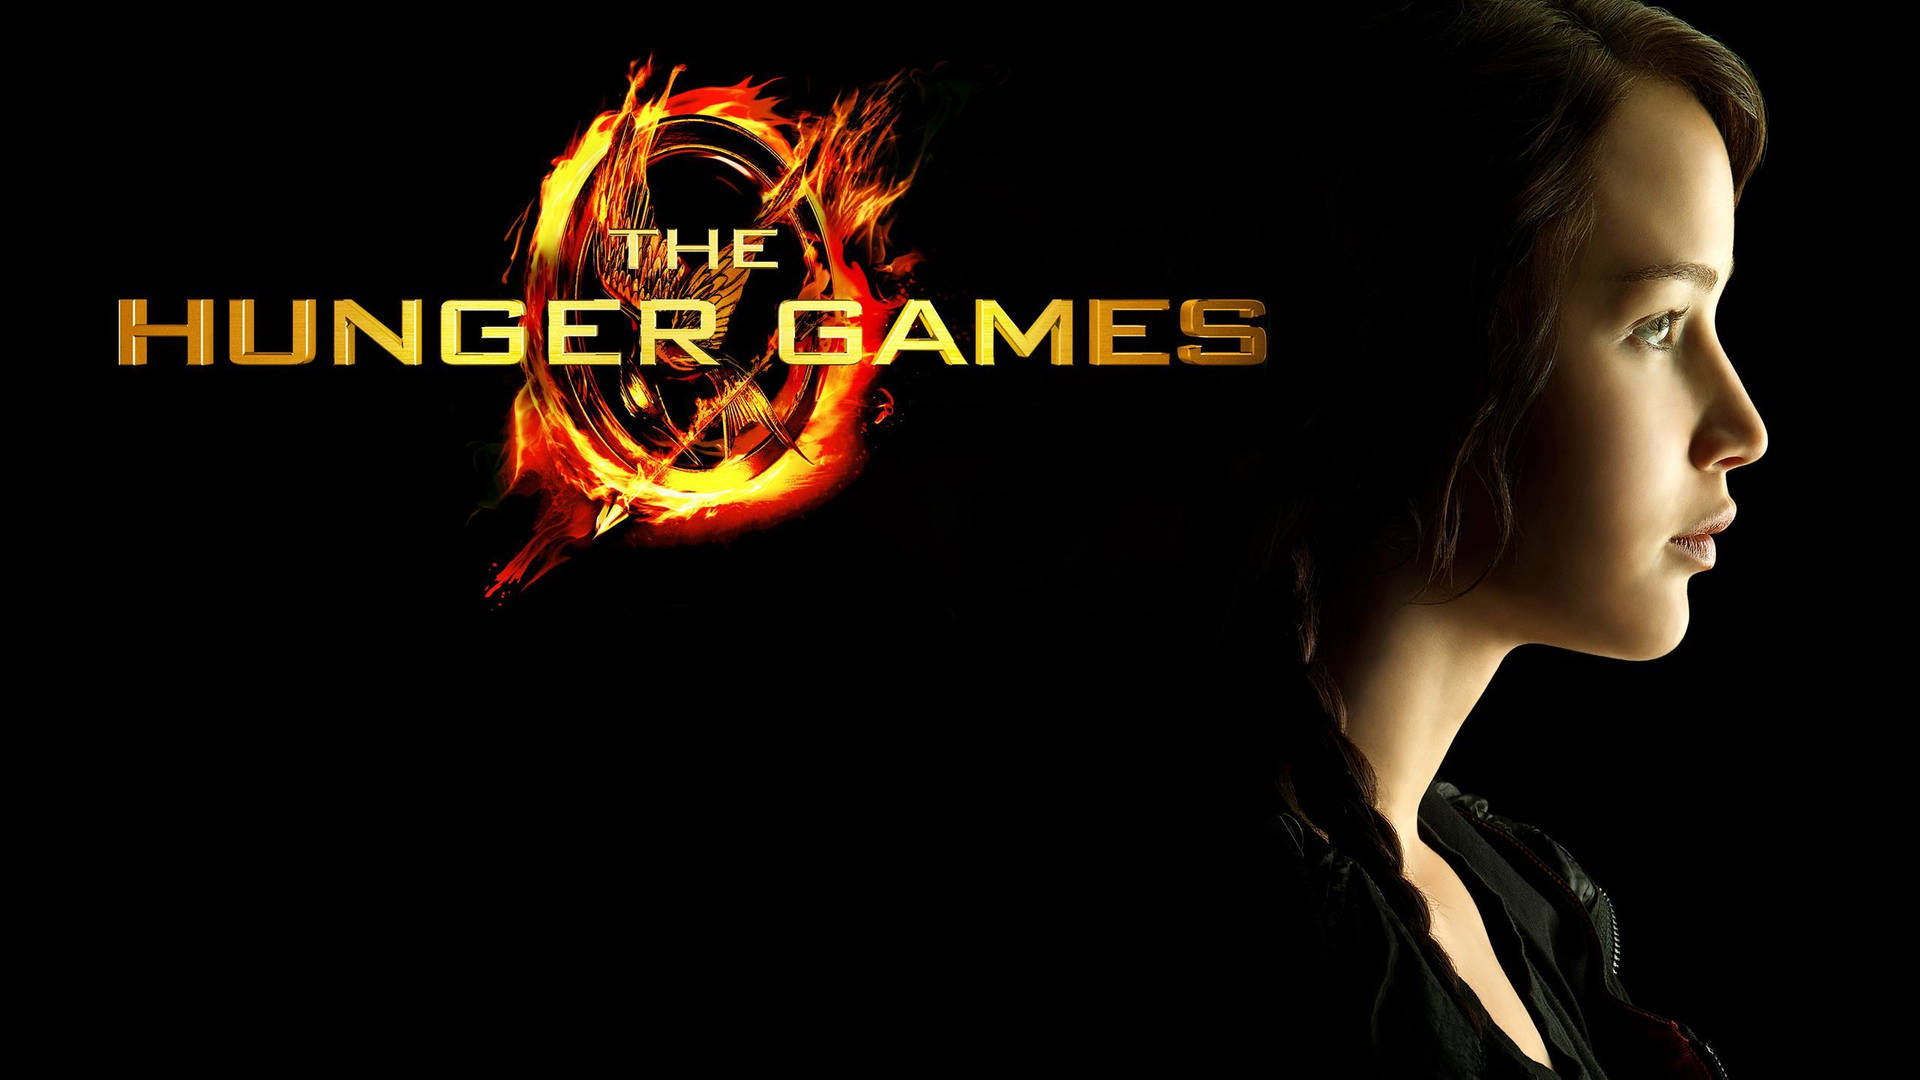 The Hunger Games Film Series